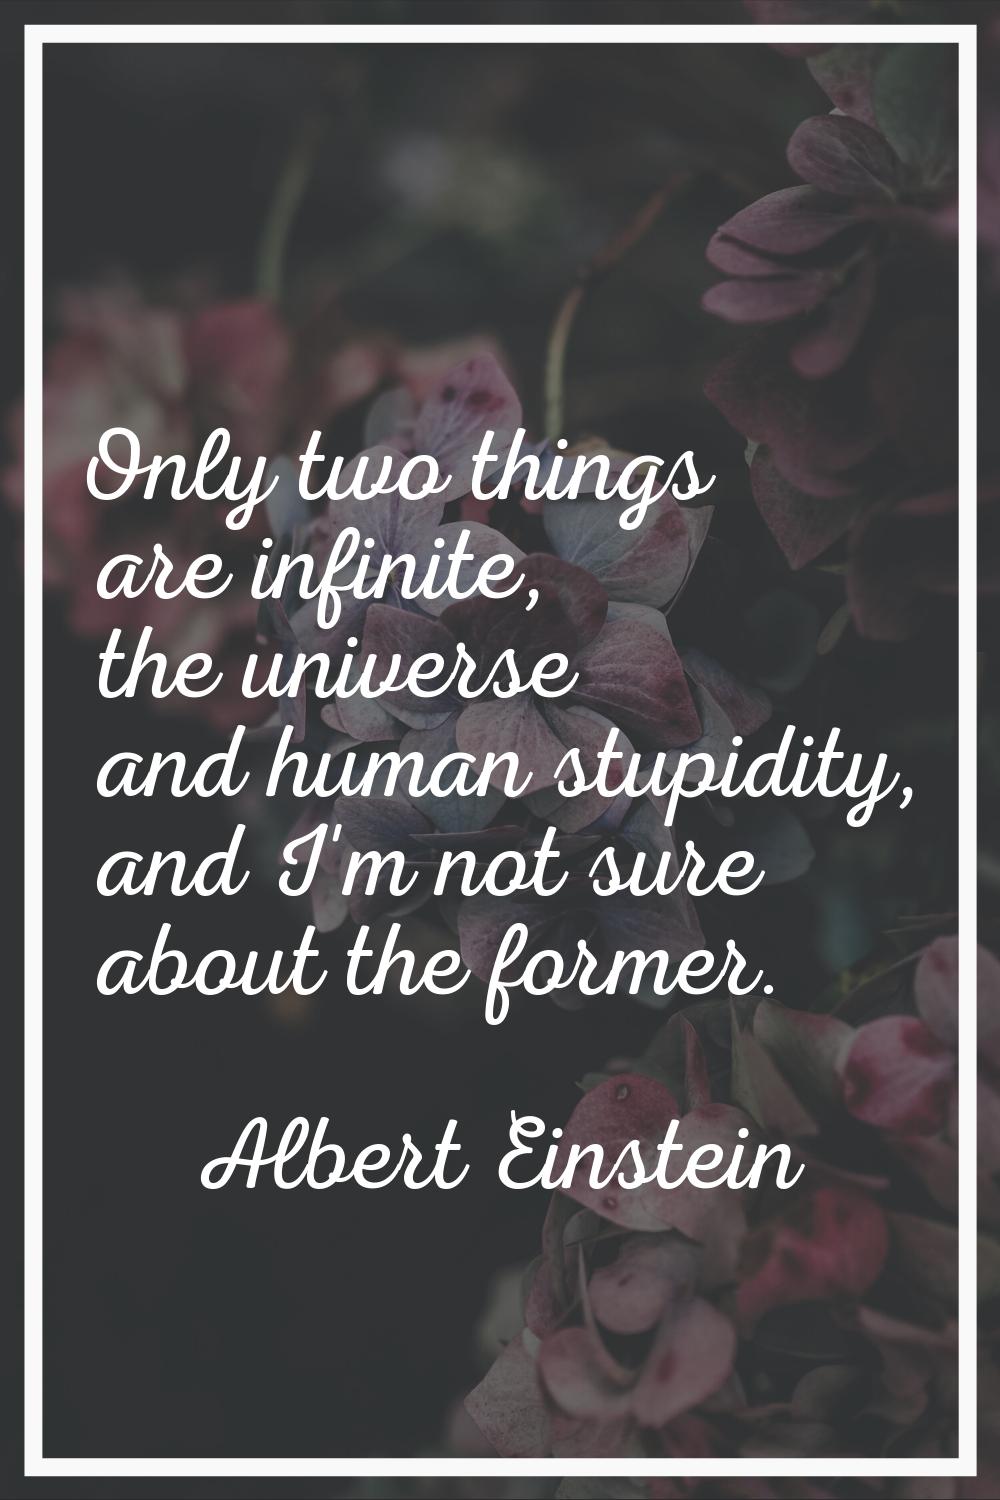 Only two things are infinite, the universe and human stupidity, and I'm not sure about the former.